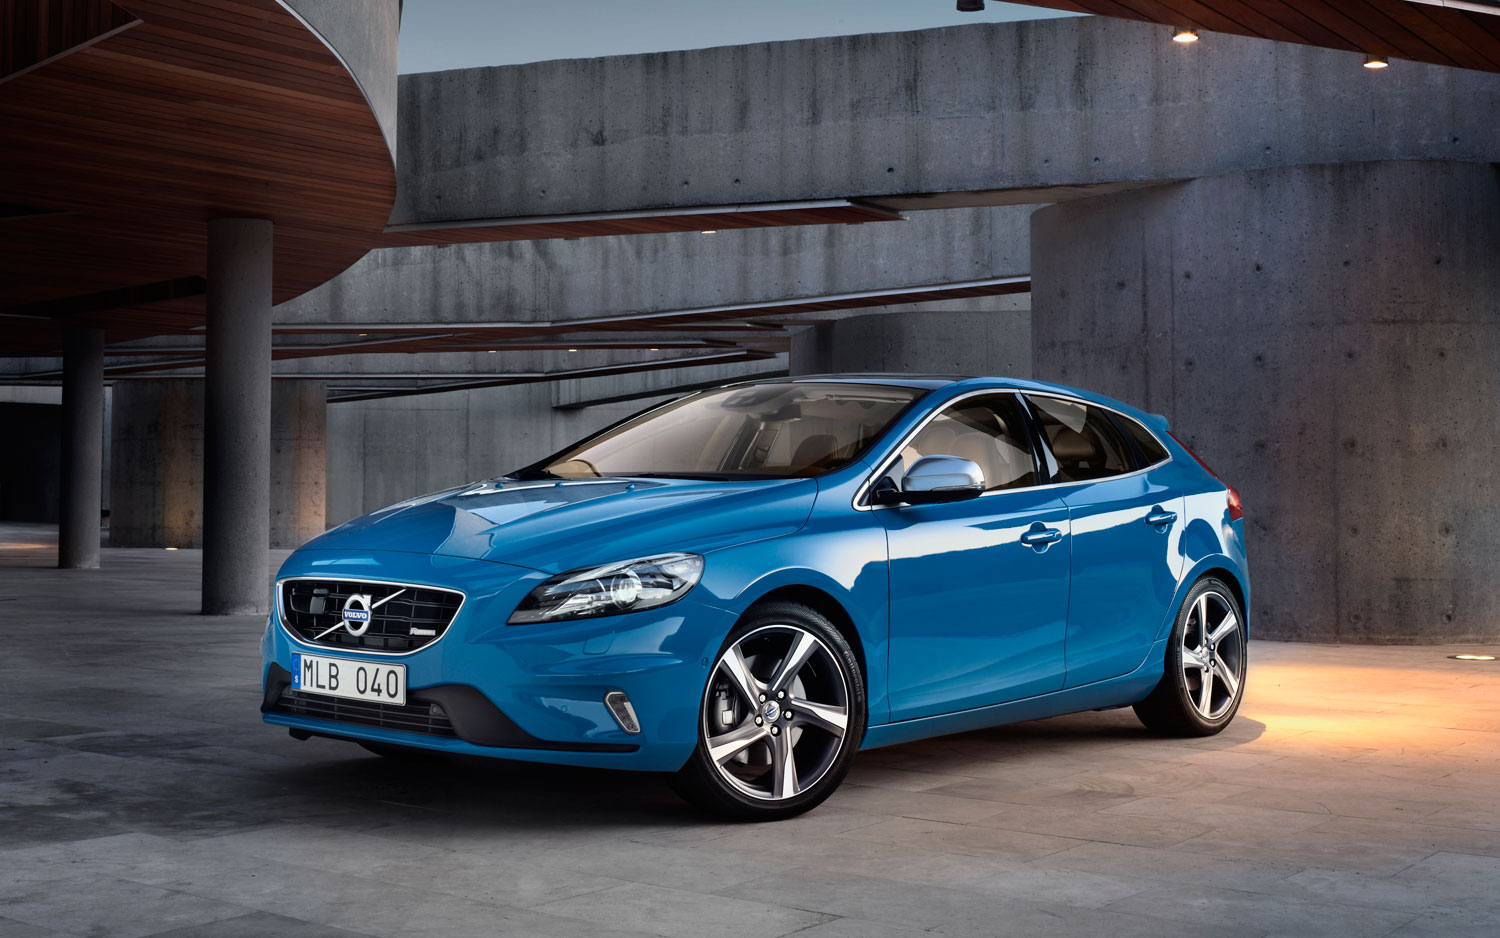 Report: Next-Generation Volvo V40 Coming to the U.S.